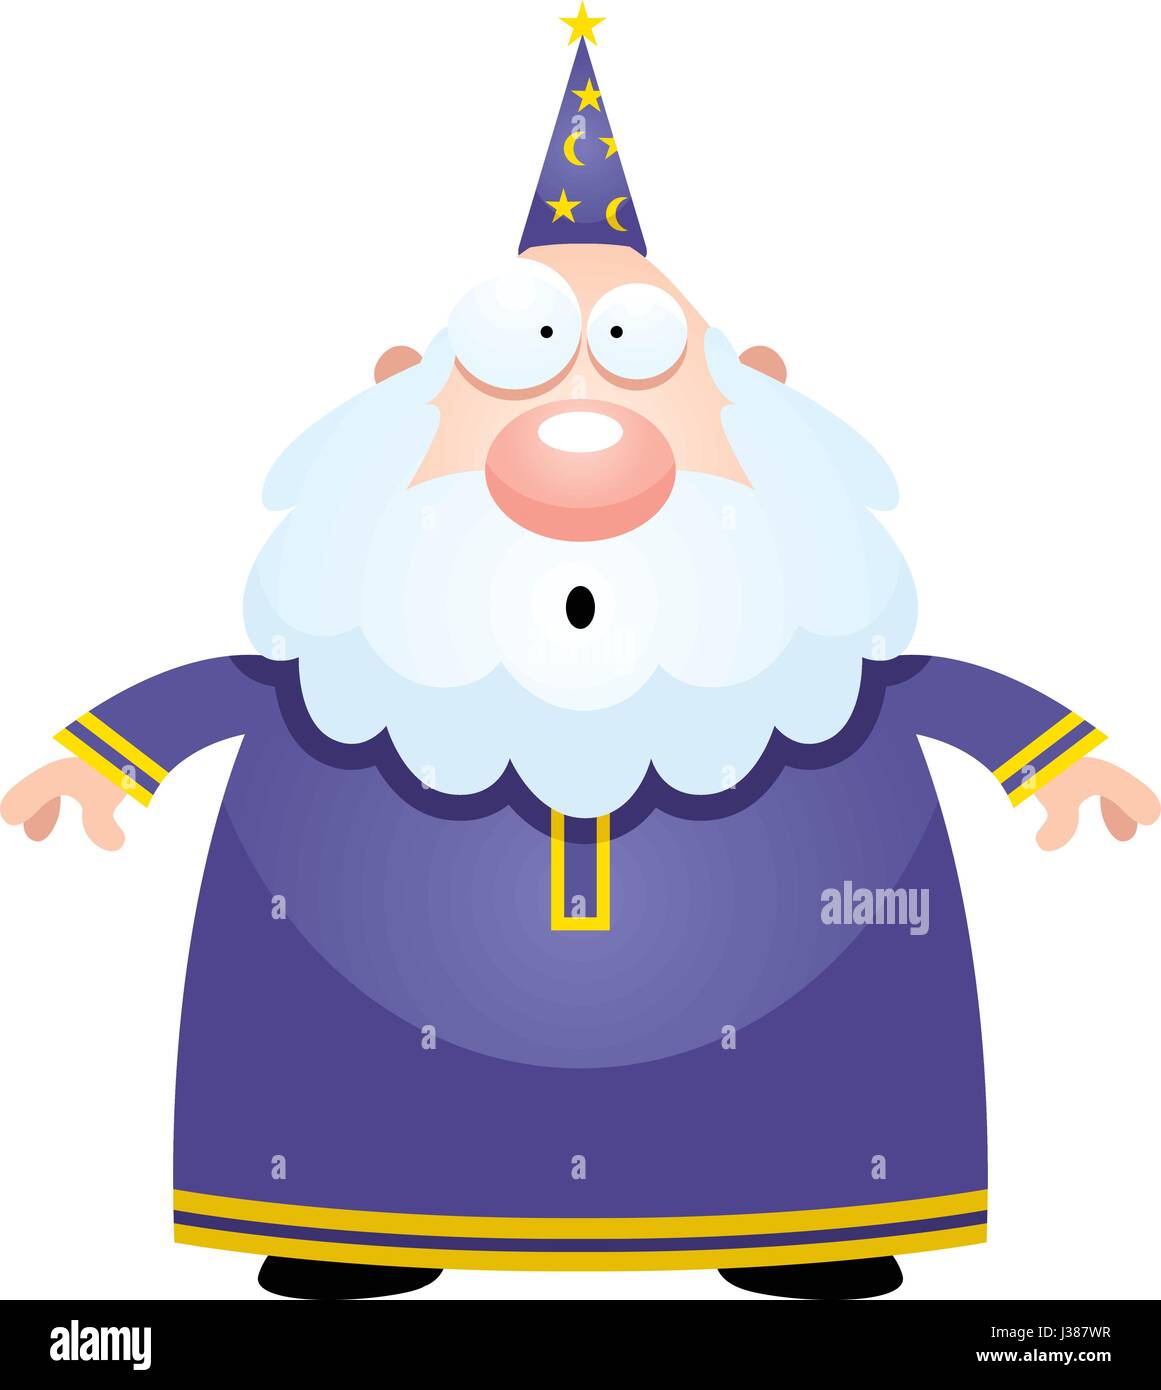 A cartoon illustration of a wizard looking surprised. Stock Vector